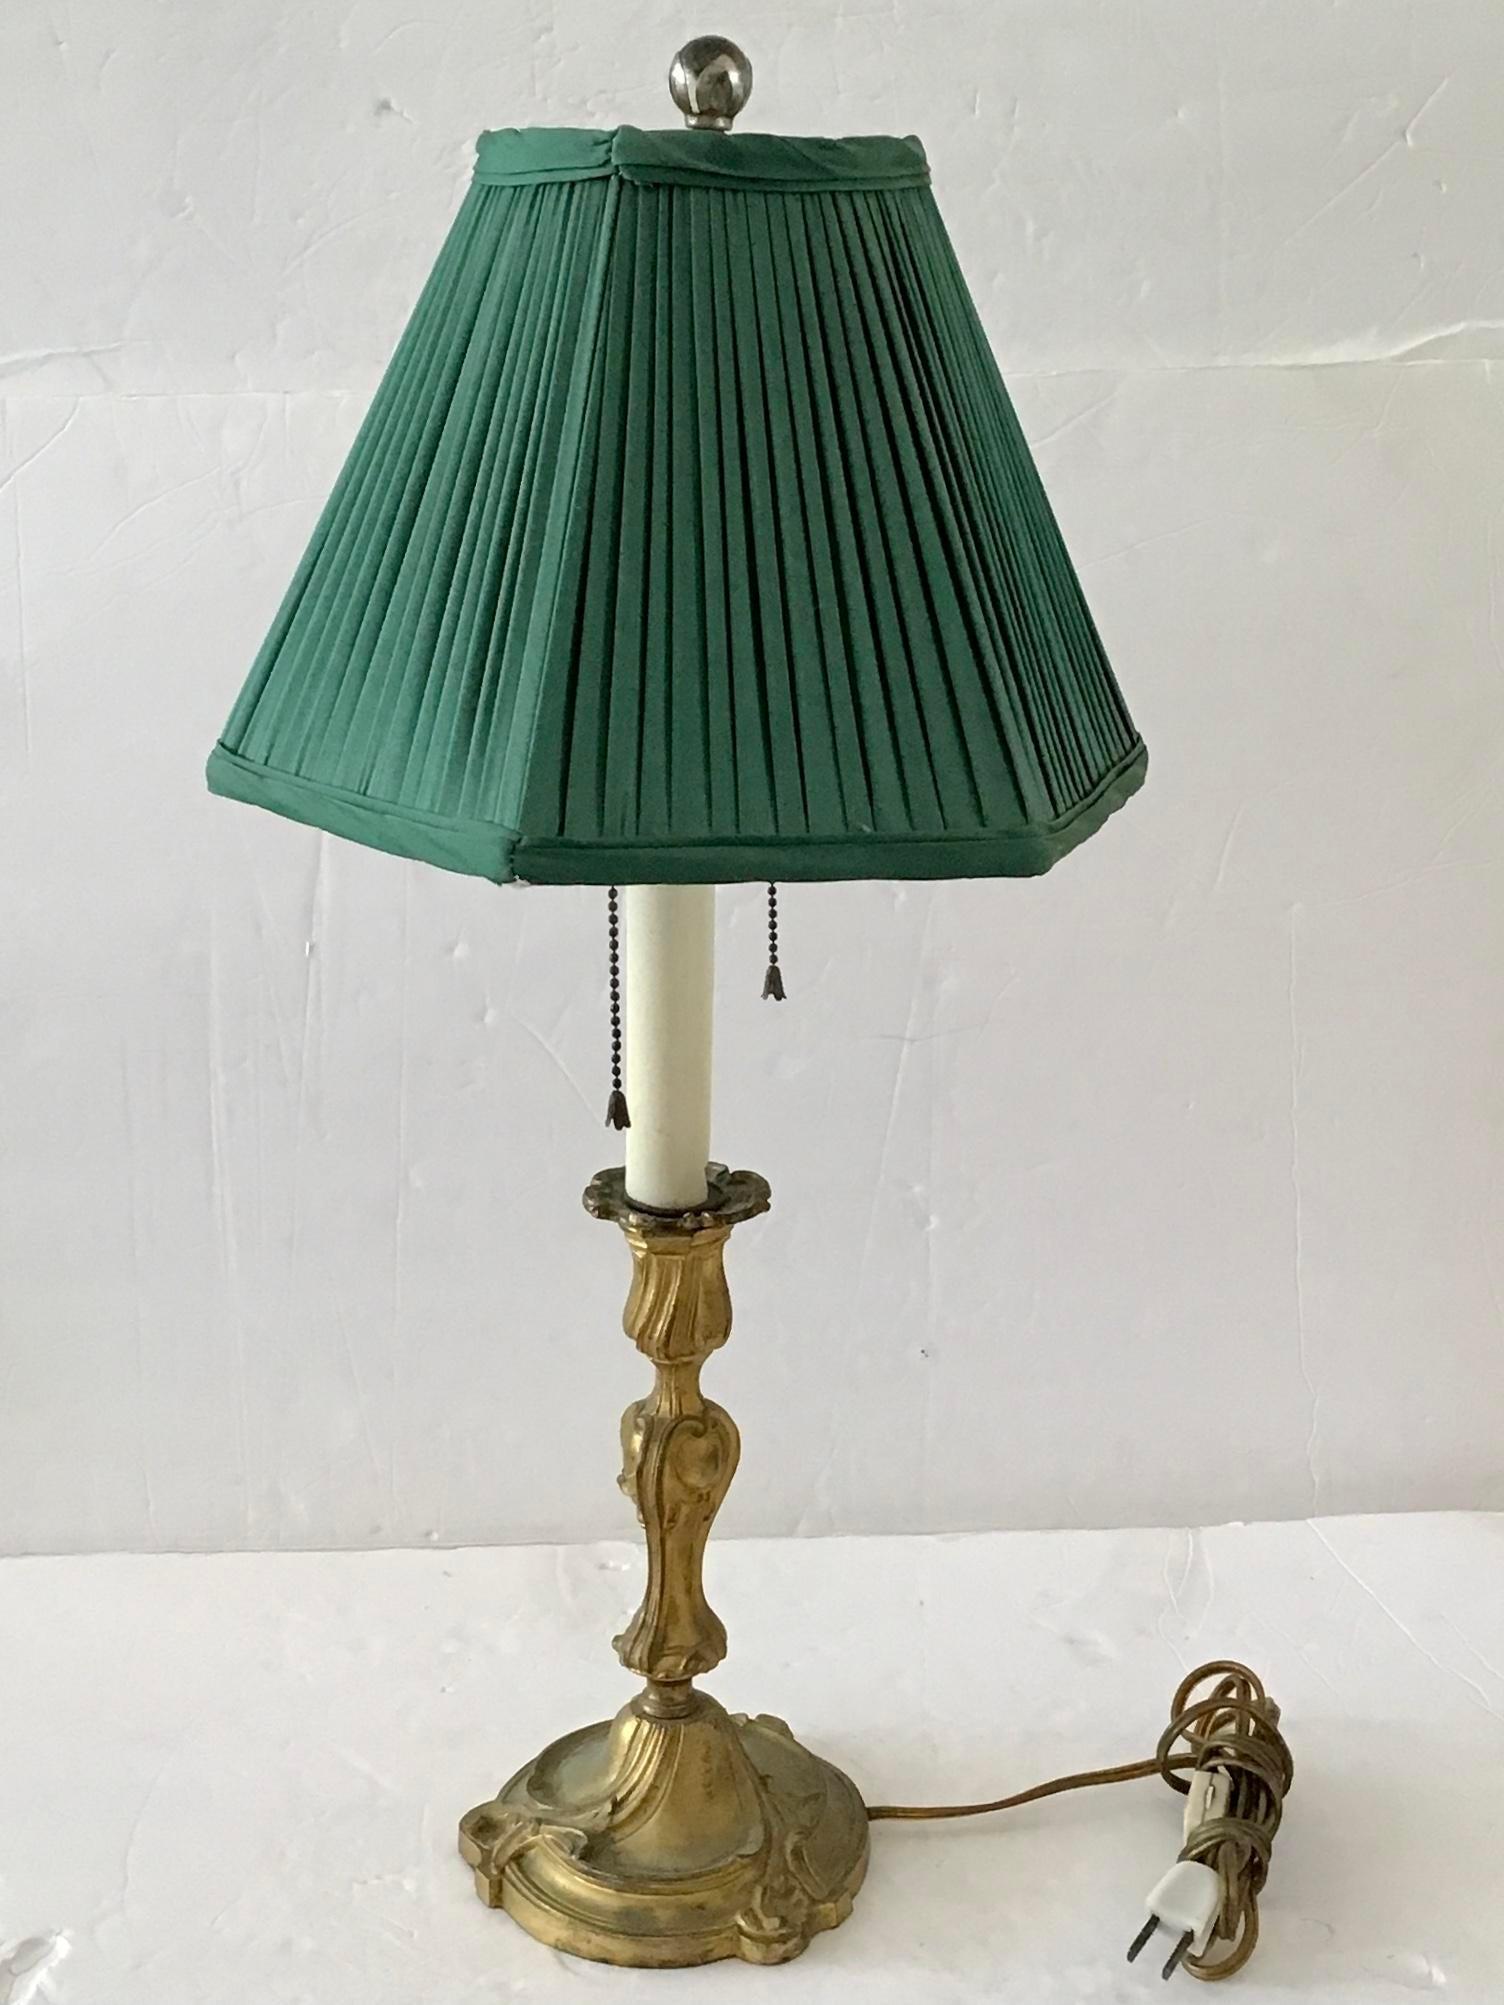 French Provincial French Git Bronze Table Lamp With Green Shade For Sale